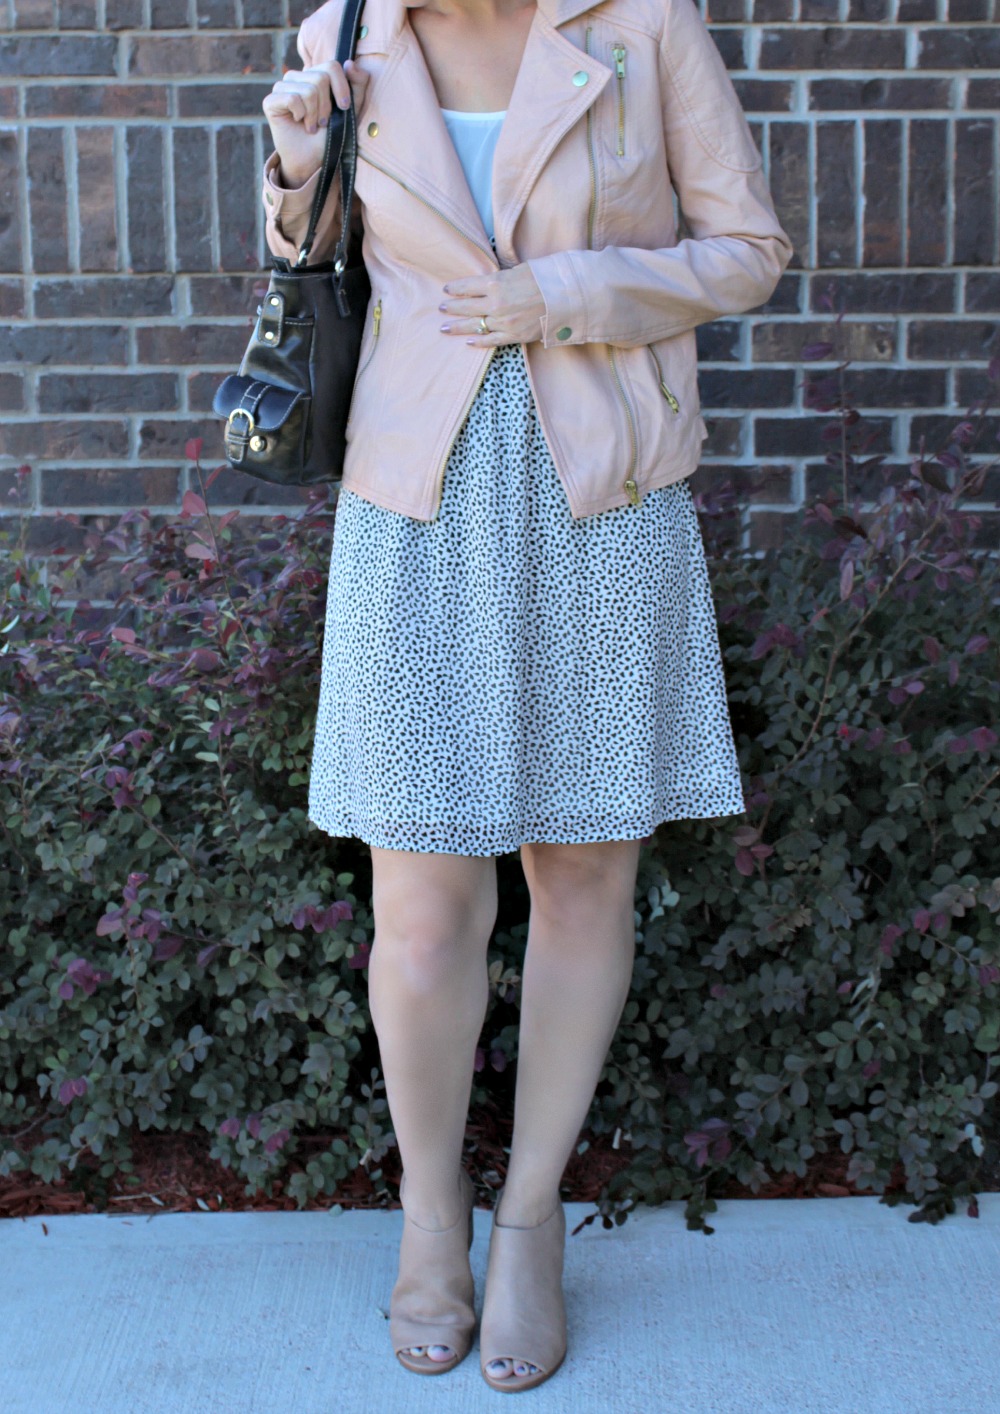 Cute Outfit Ideas Featuring a Pink Leather Jacket